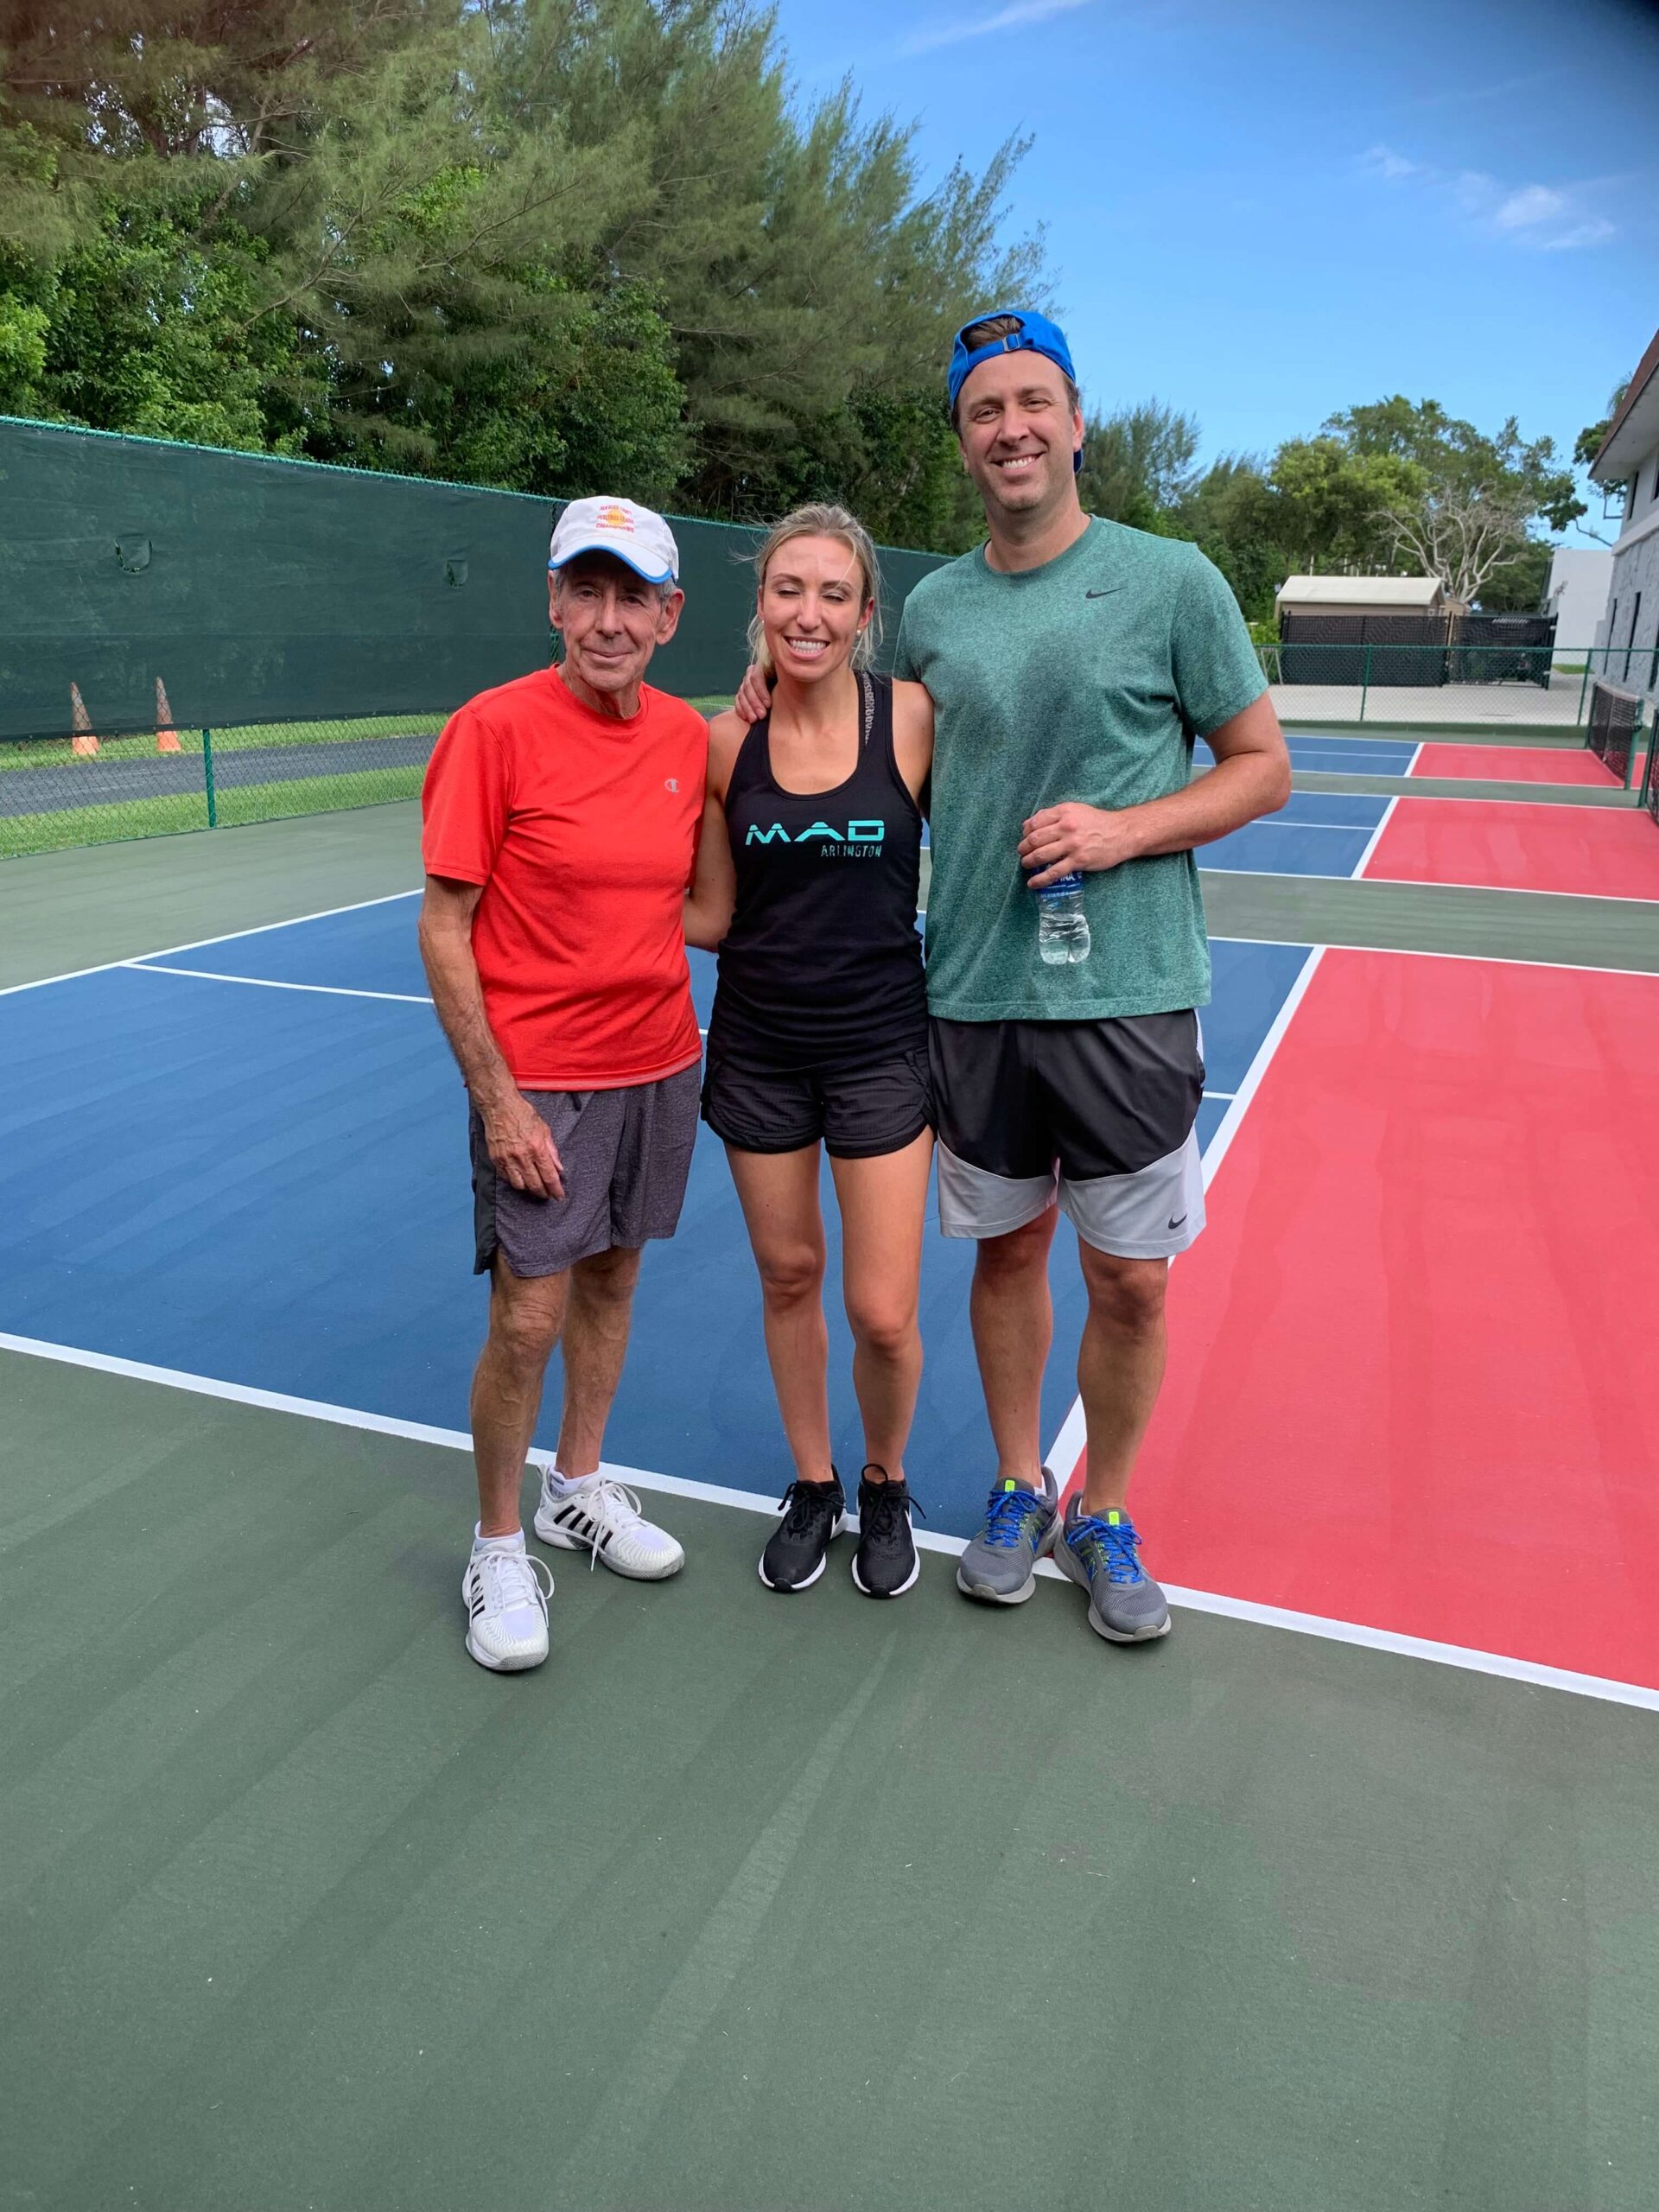 Terrific beginners pickleball lesson with Jon and Ashley in Delray Beach, FL